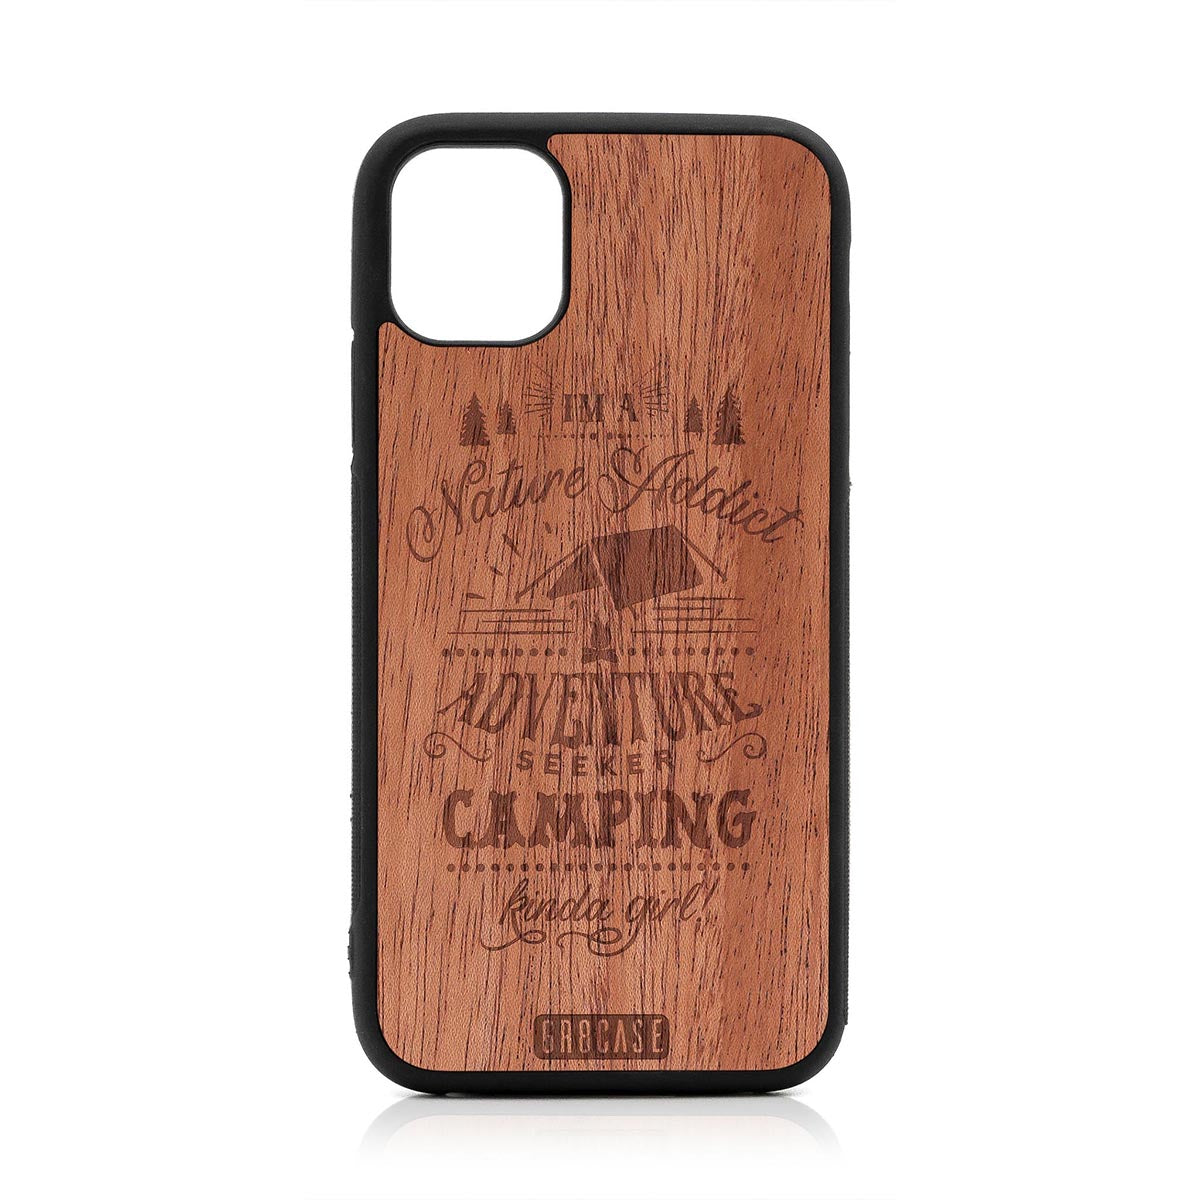 I'm A Nature Addict Adventure Seeker Camping Kinda Girl Design Wood Case For iPhone 11 by GR8CASE